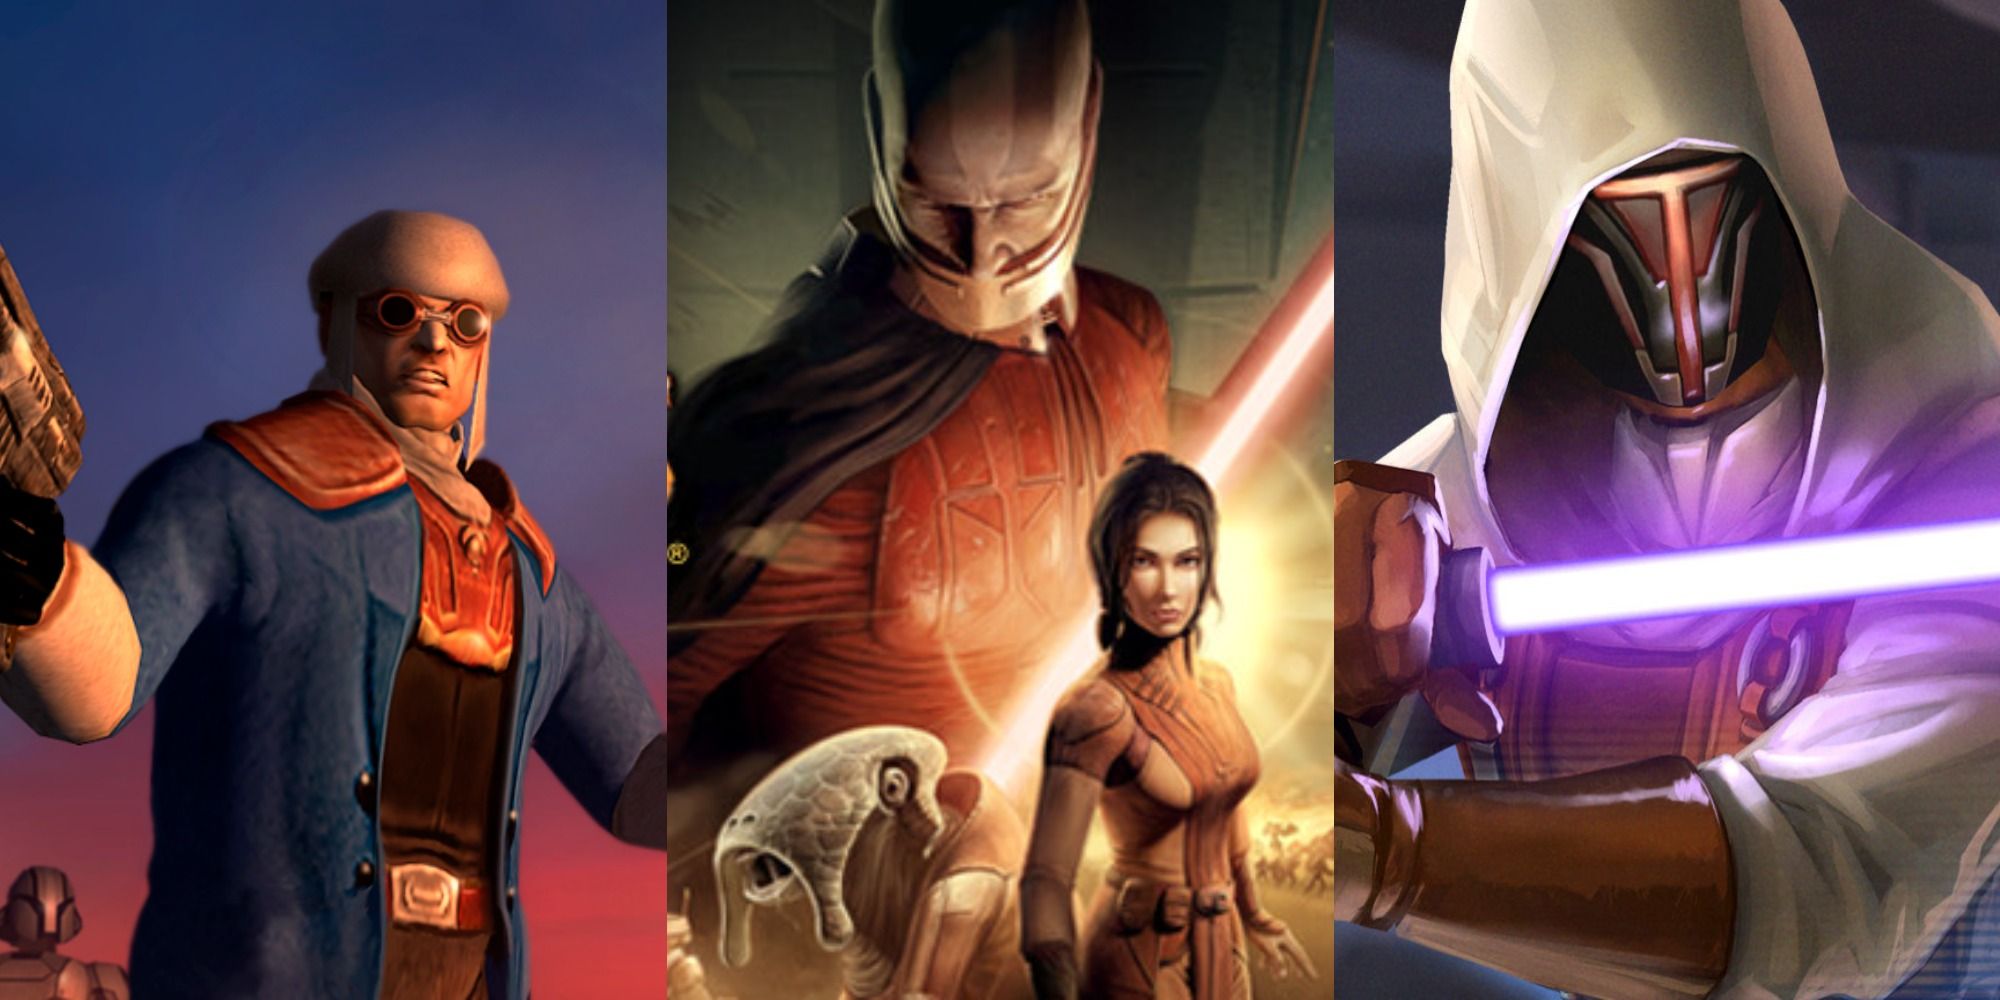 Best KOTOR Armor Calo Nord, Game Cover, and Revan in Star Forge Robes Featured Split